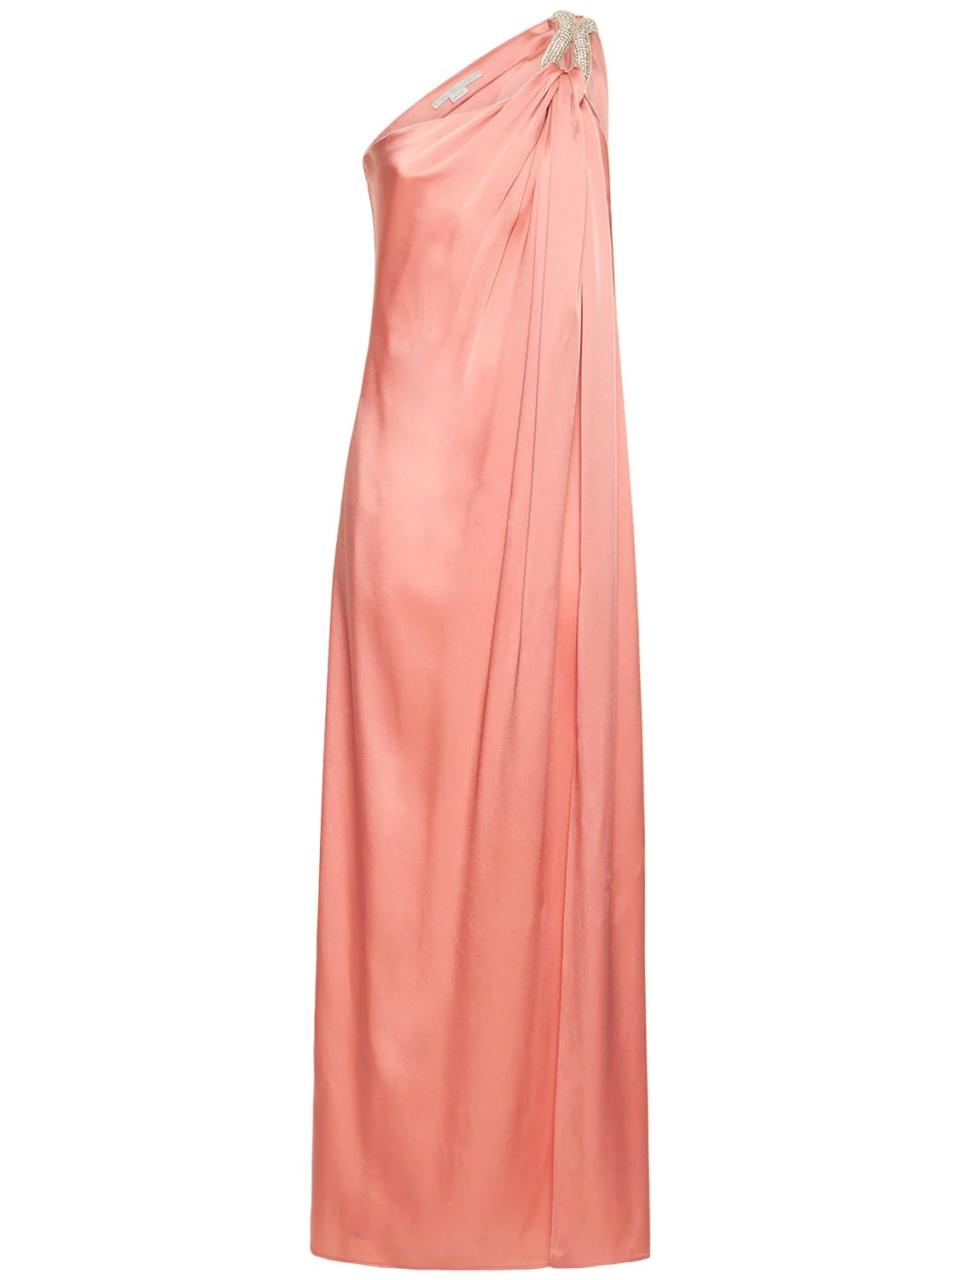 Stella McCartney, Double Satin Long Dress with Crystals. - Credit: Courtesy Image.